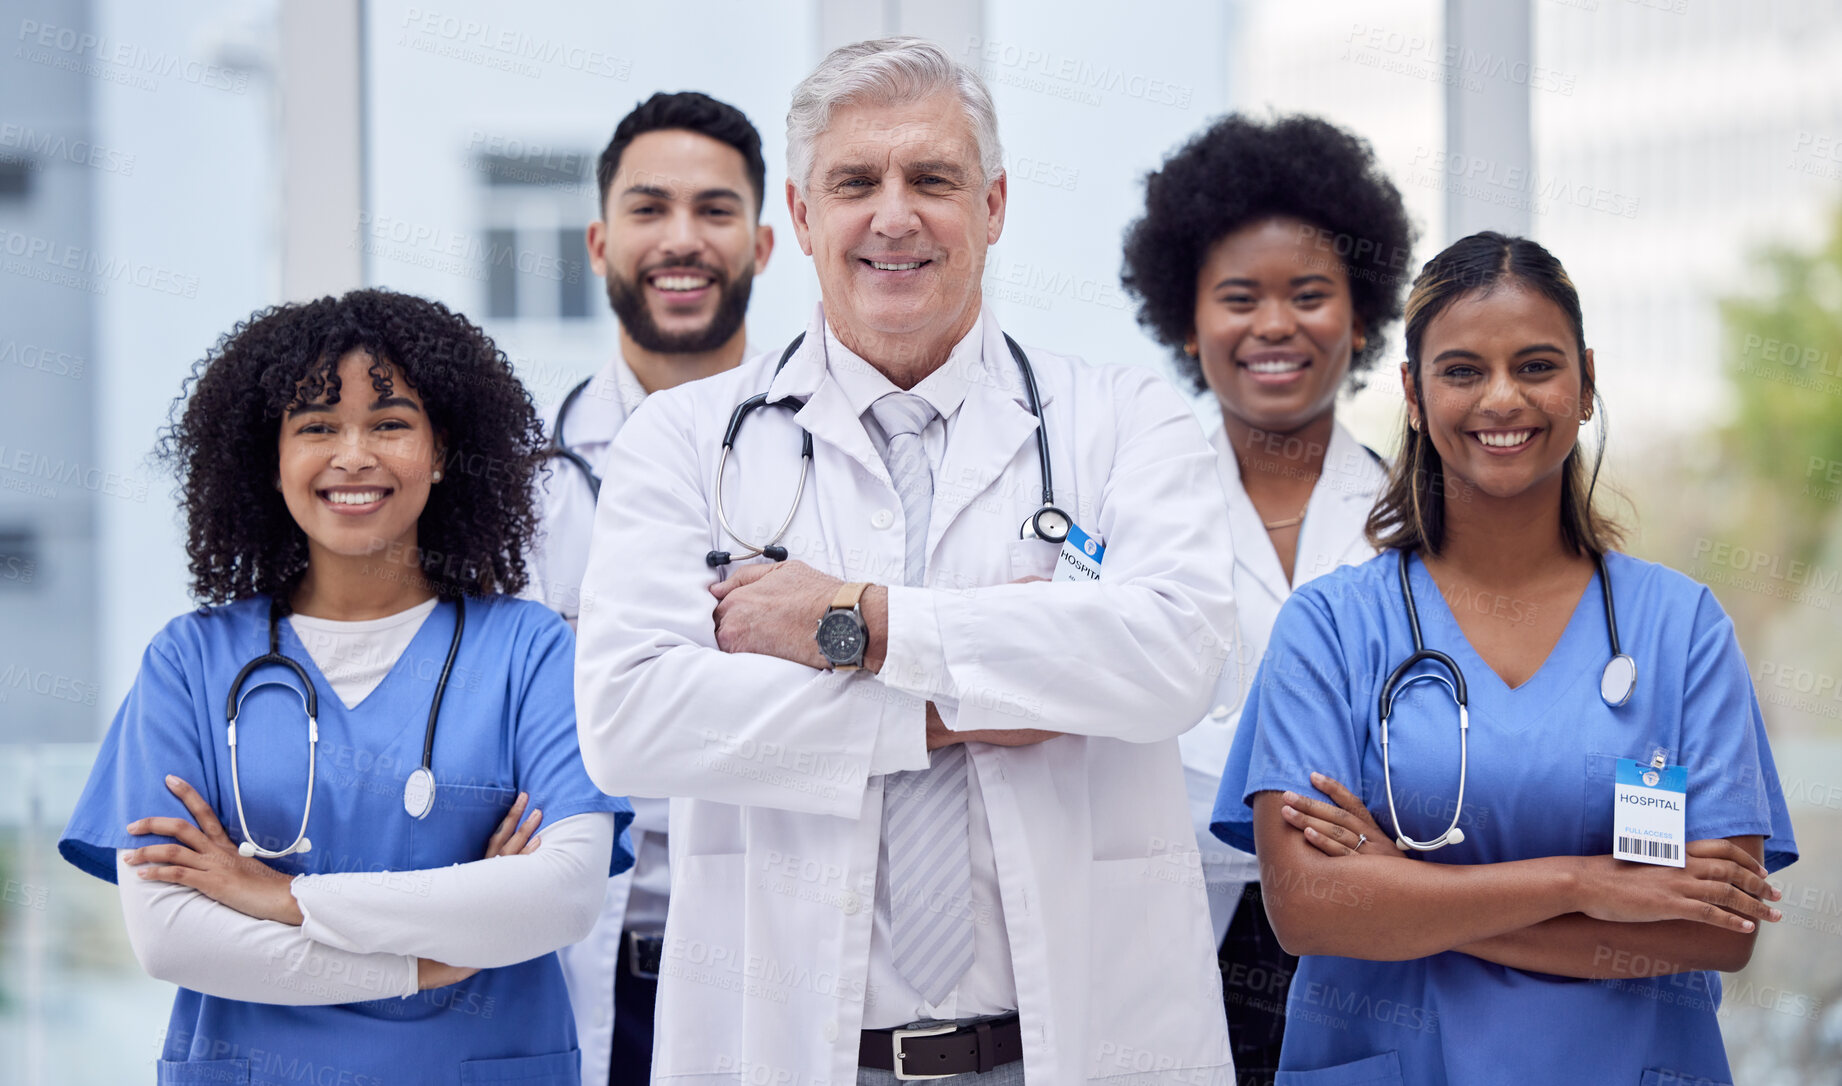 Buy stock photo Doctors, nurses or arms crossed portrait in hospital diversity, about us or leadership in people trust, community or support. Smile, happy and confident healthcare workers in teamwork collaboration